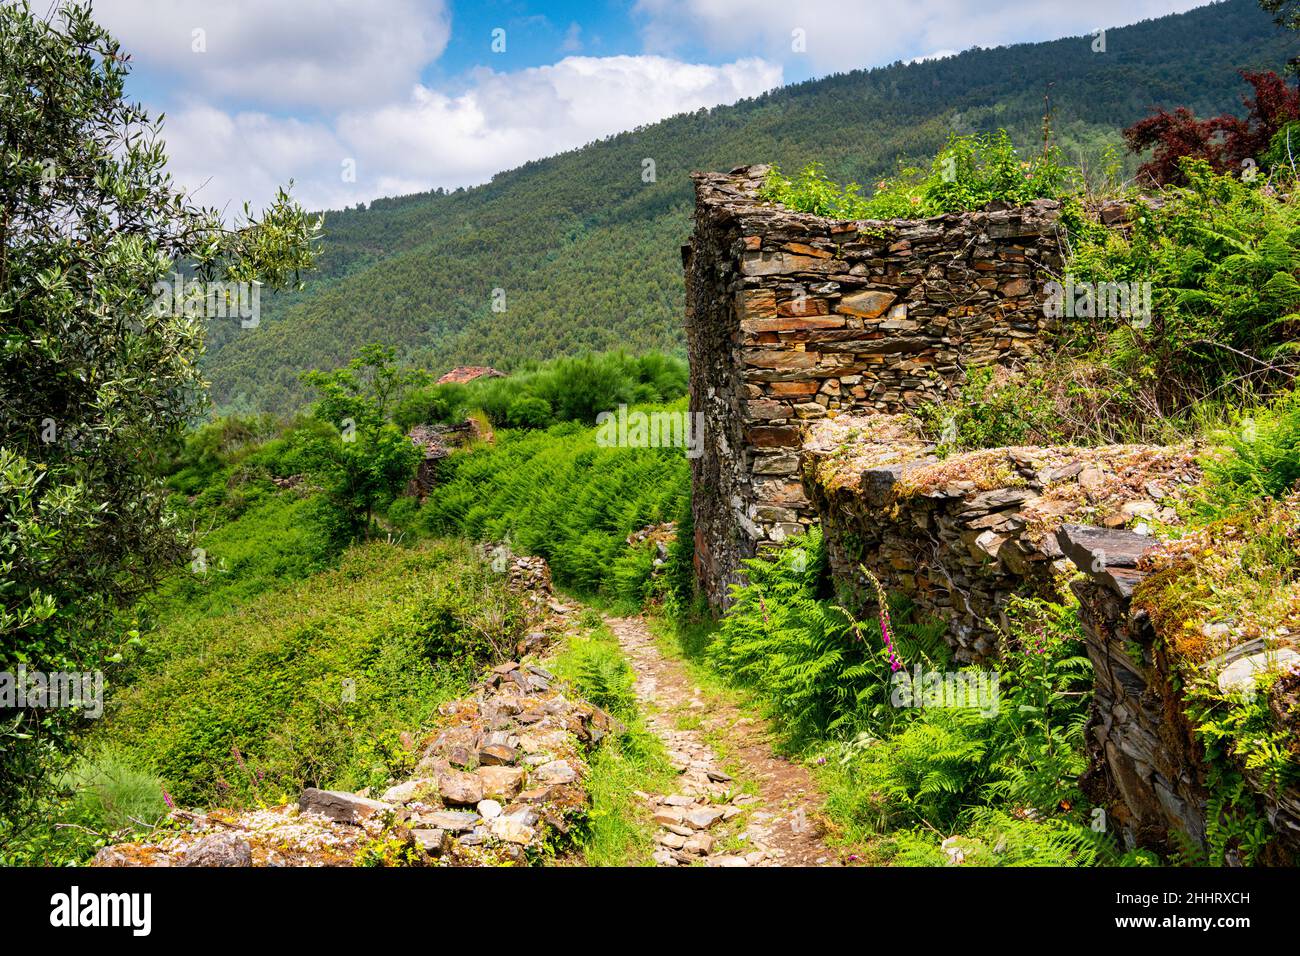 Overgrown ruins and lush landscape along the fern-lined hiking trail to the schist village of Talasnal in the Serra da Lousa mountains of Portugal Stock Photo